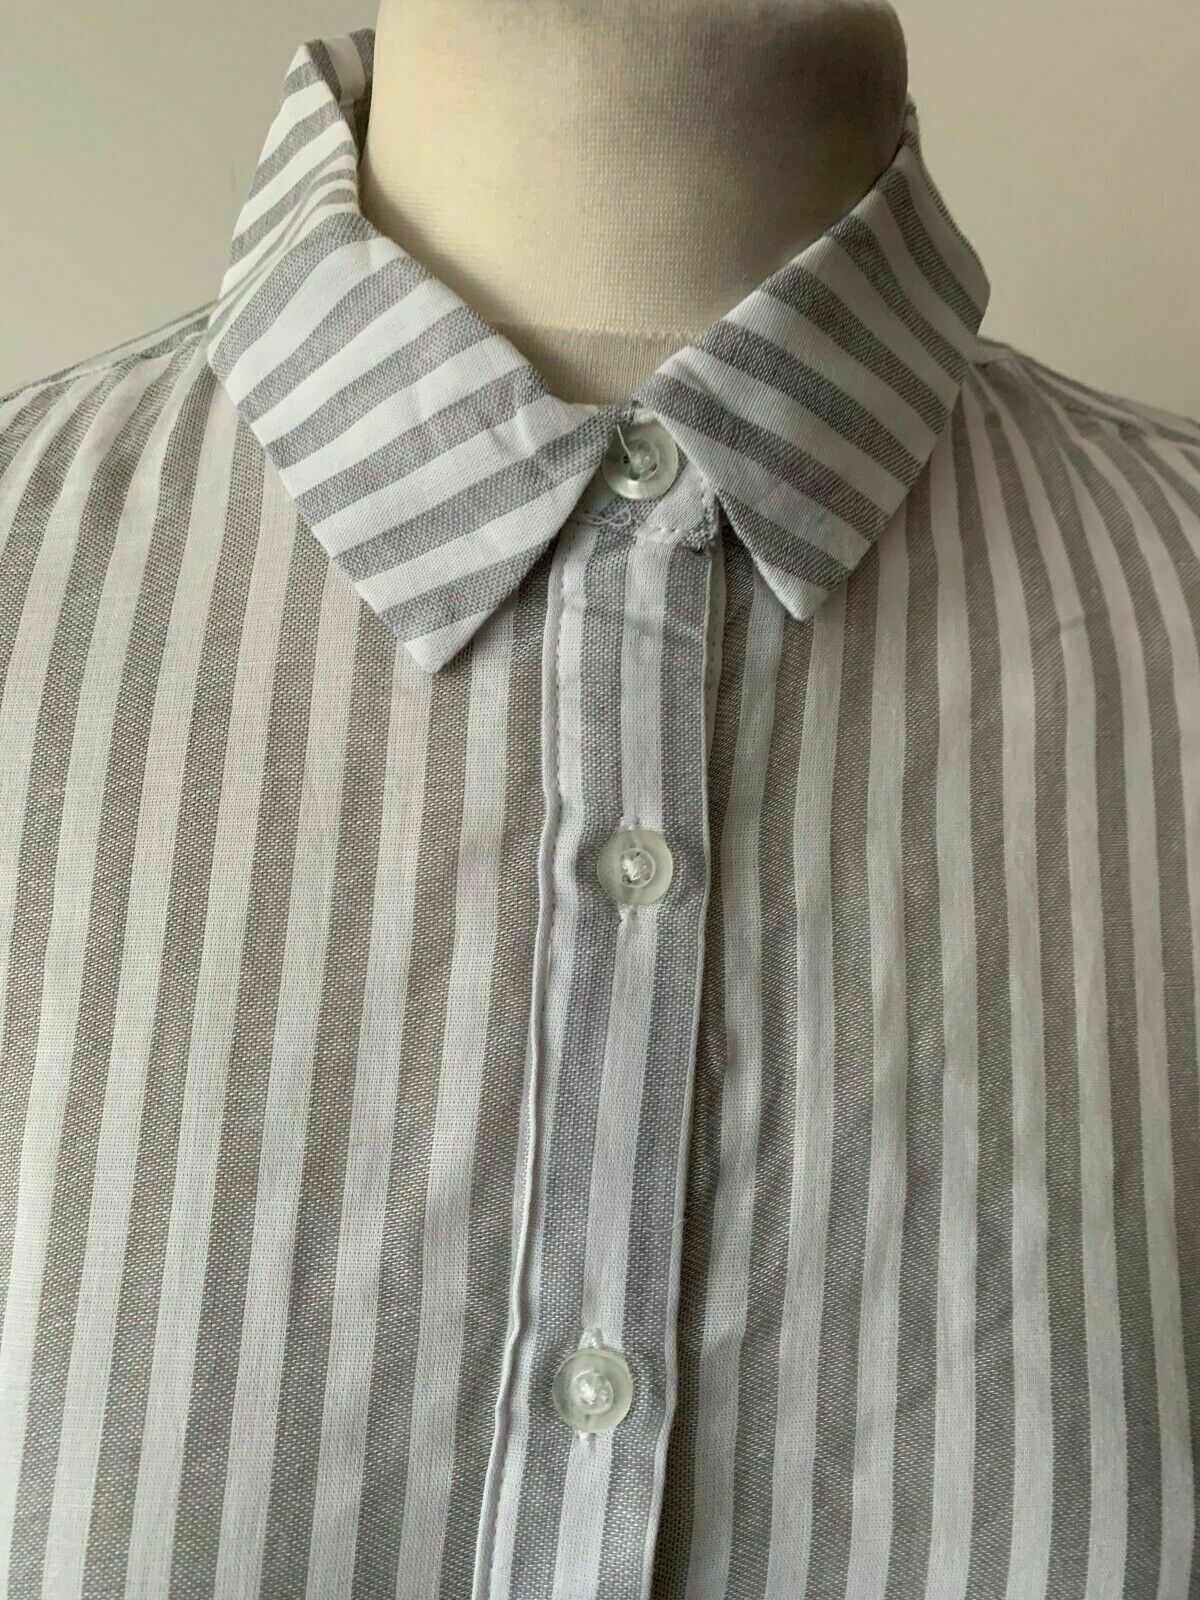 New Look Contrast Mixed Front Stripe Shirt Lightweight Size 10 Boxy Wide